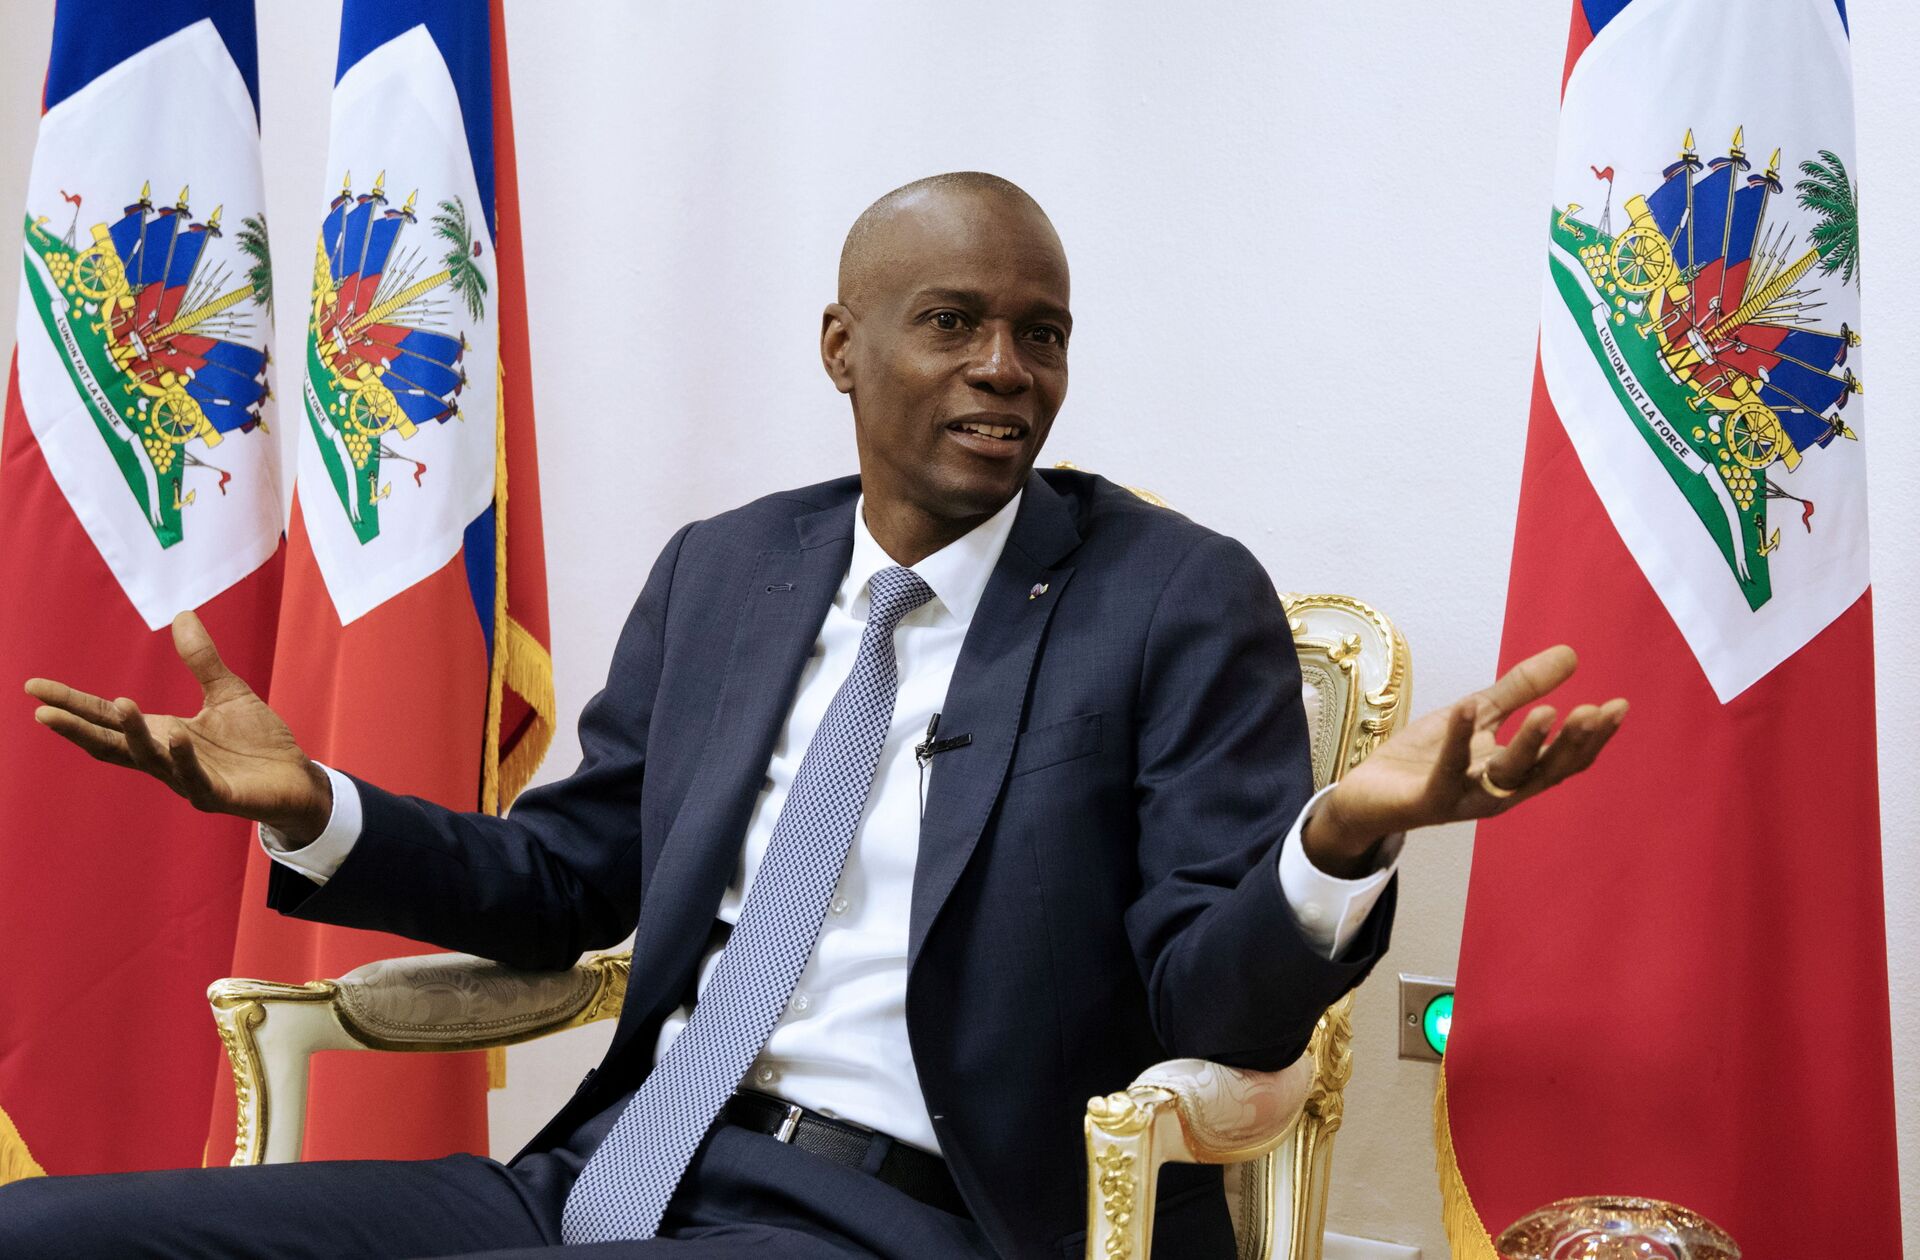 FILE PHOTO: Haiti's President Jovenel Moise speaks during an interview with Reuters at the National Palace of Port-au-Prince, Haiti January 11, 2020. REUTERS/Valerie Baeriswyl/File Photo - Sputnik International, 1920, 07.09.2021